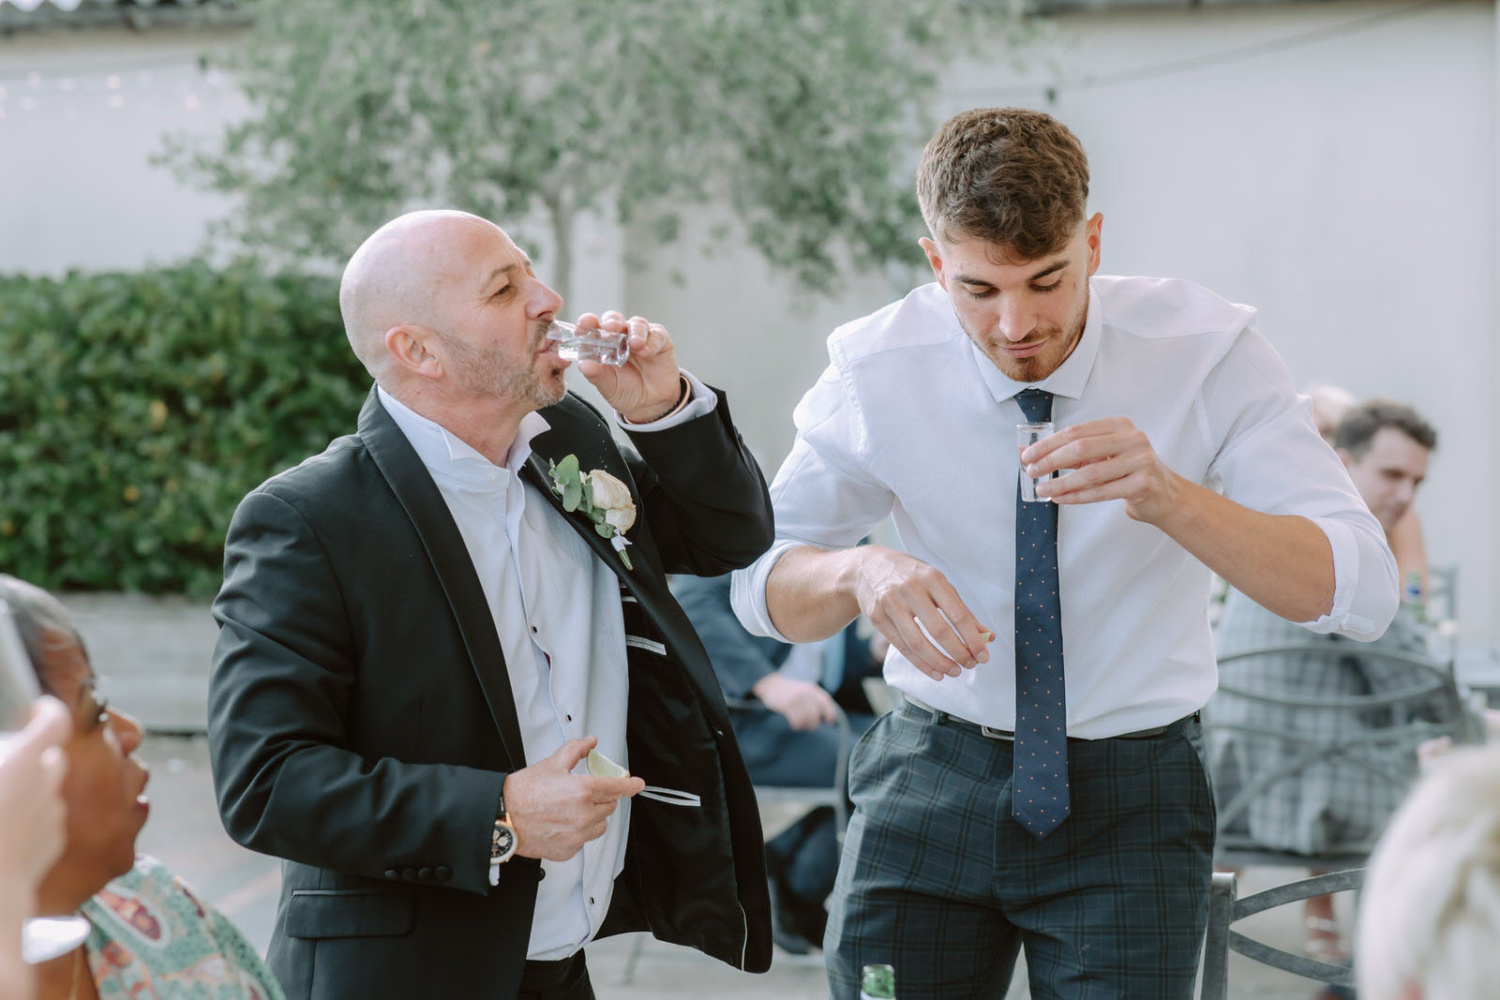 Two men drinking from glasses at a wedding reception.